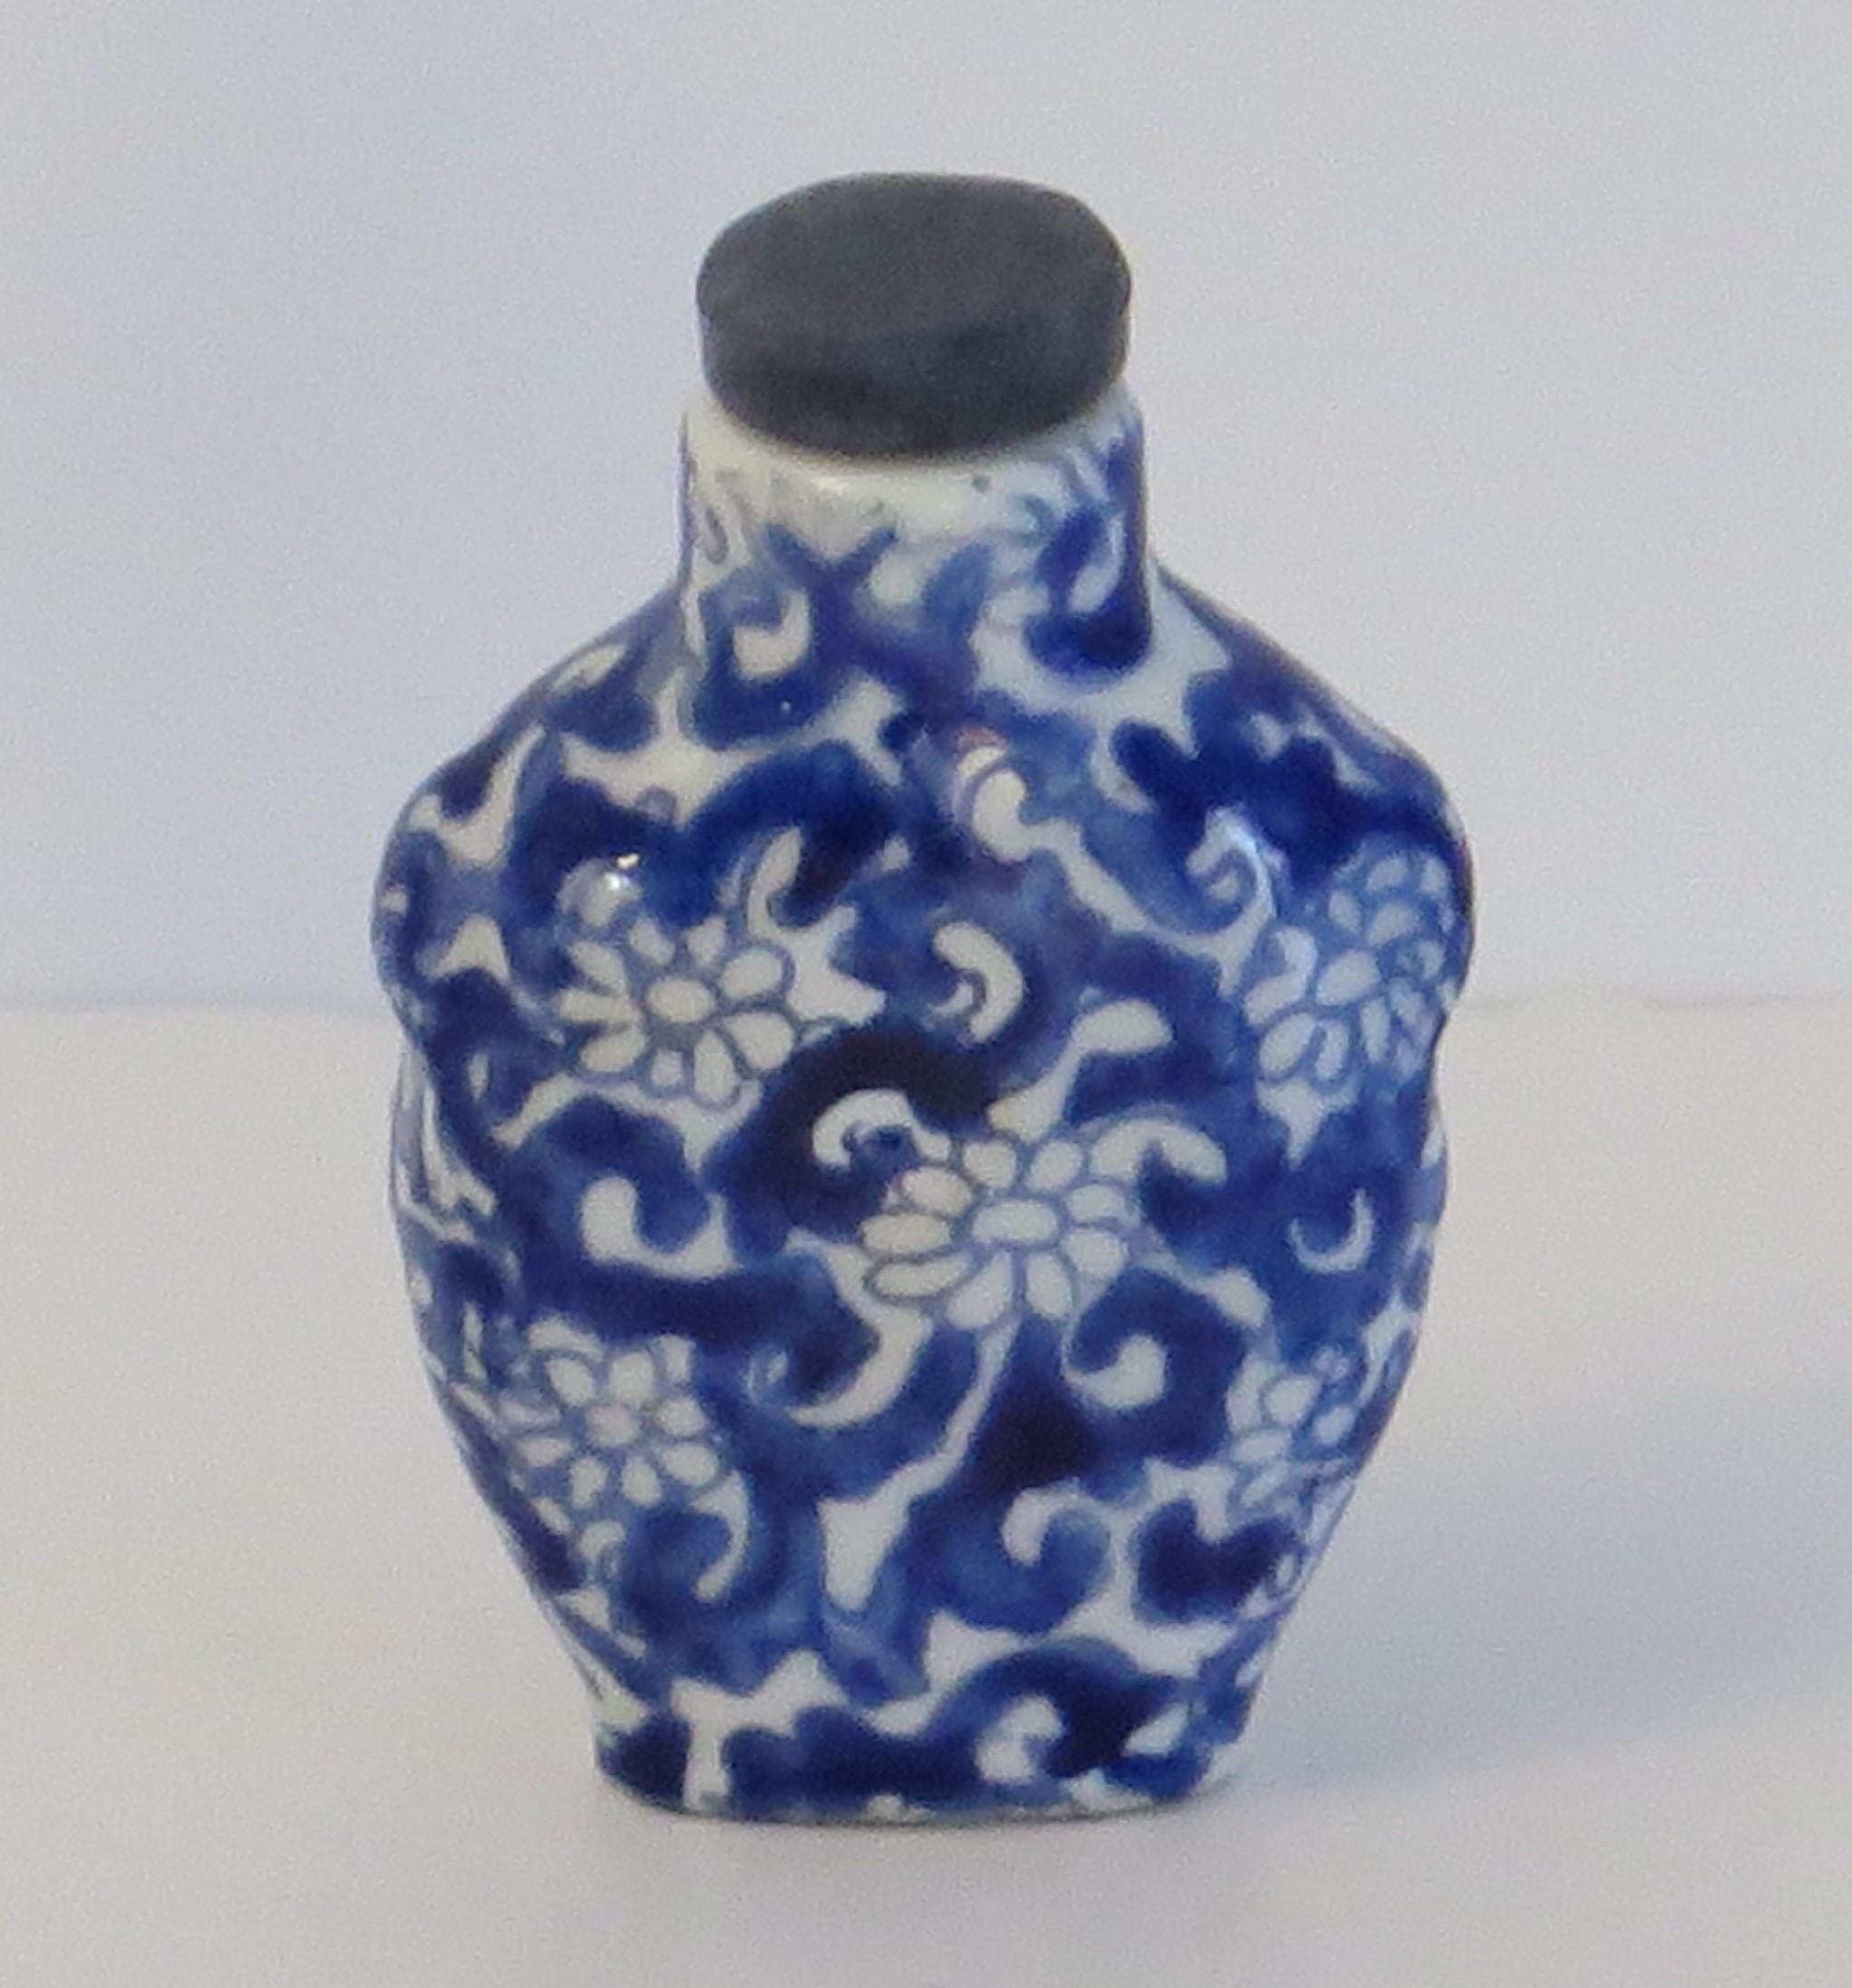 This is a good Chinese Export snuff bottle, made from porcelain and hand painted in cobalt blue, dating to the mid 20th century, circa 1940.

This piece is well potted with a baluster shape, short neck and two moulded simulated handles to the